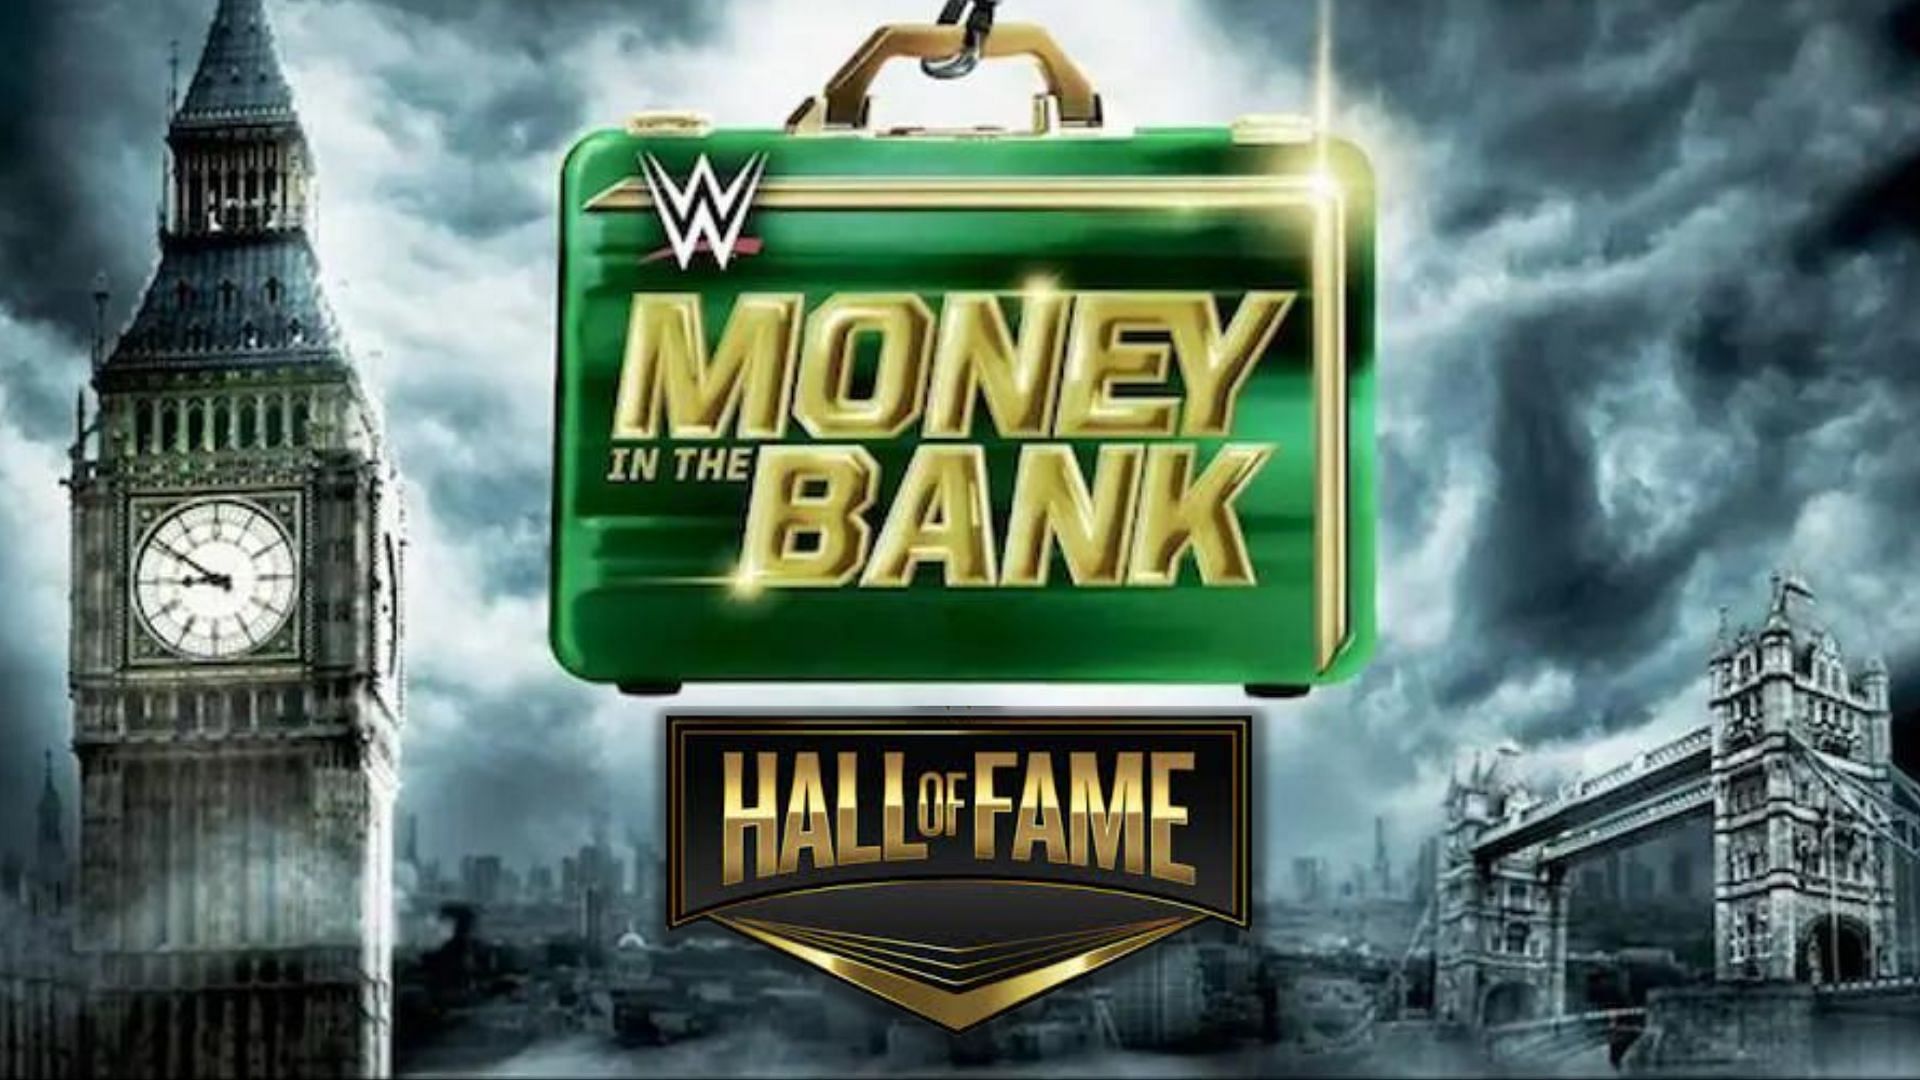 Money in the Bank PLE saw a lot of storylines developing